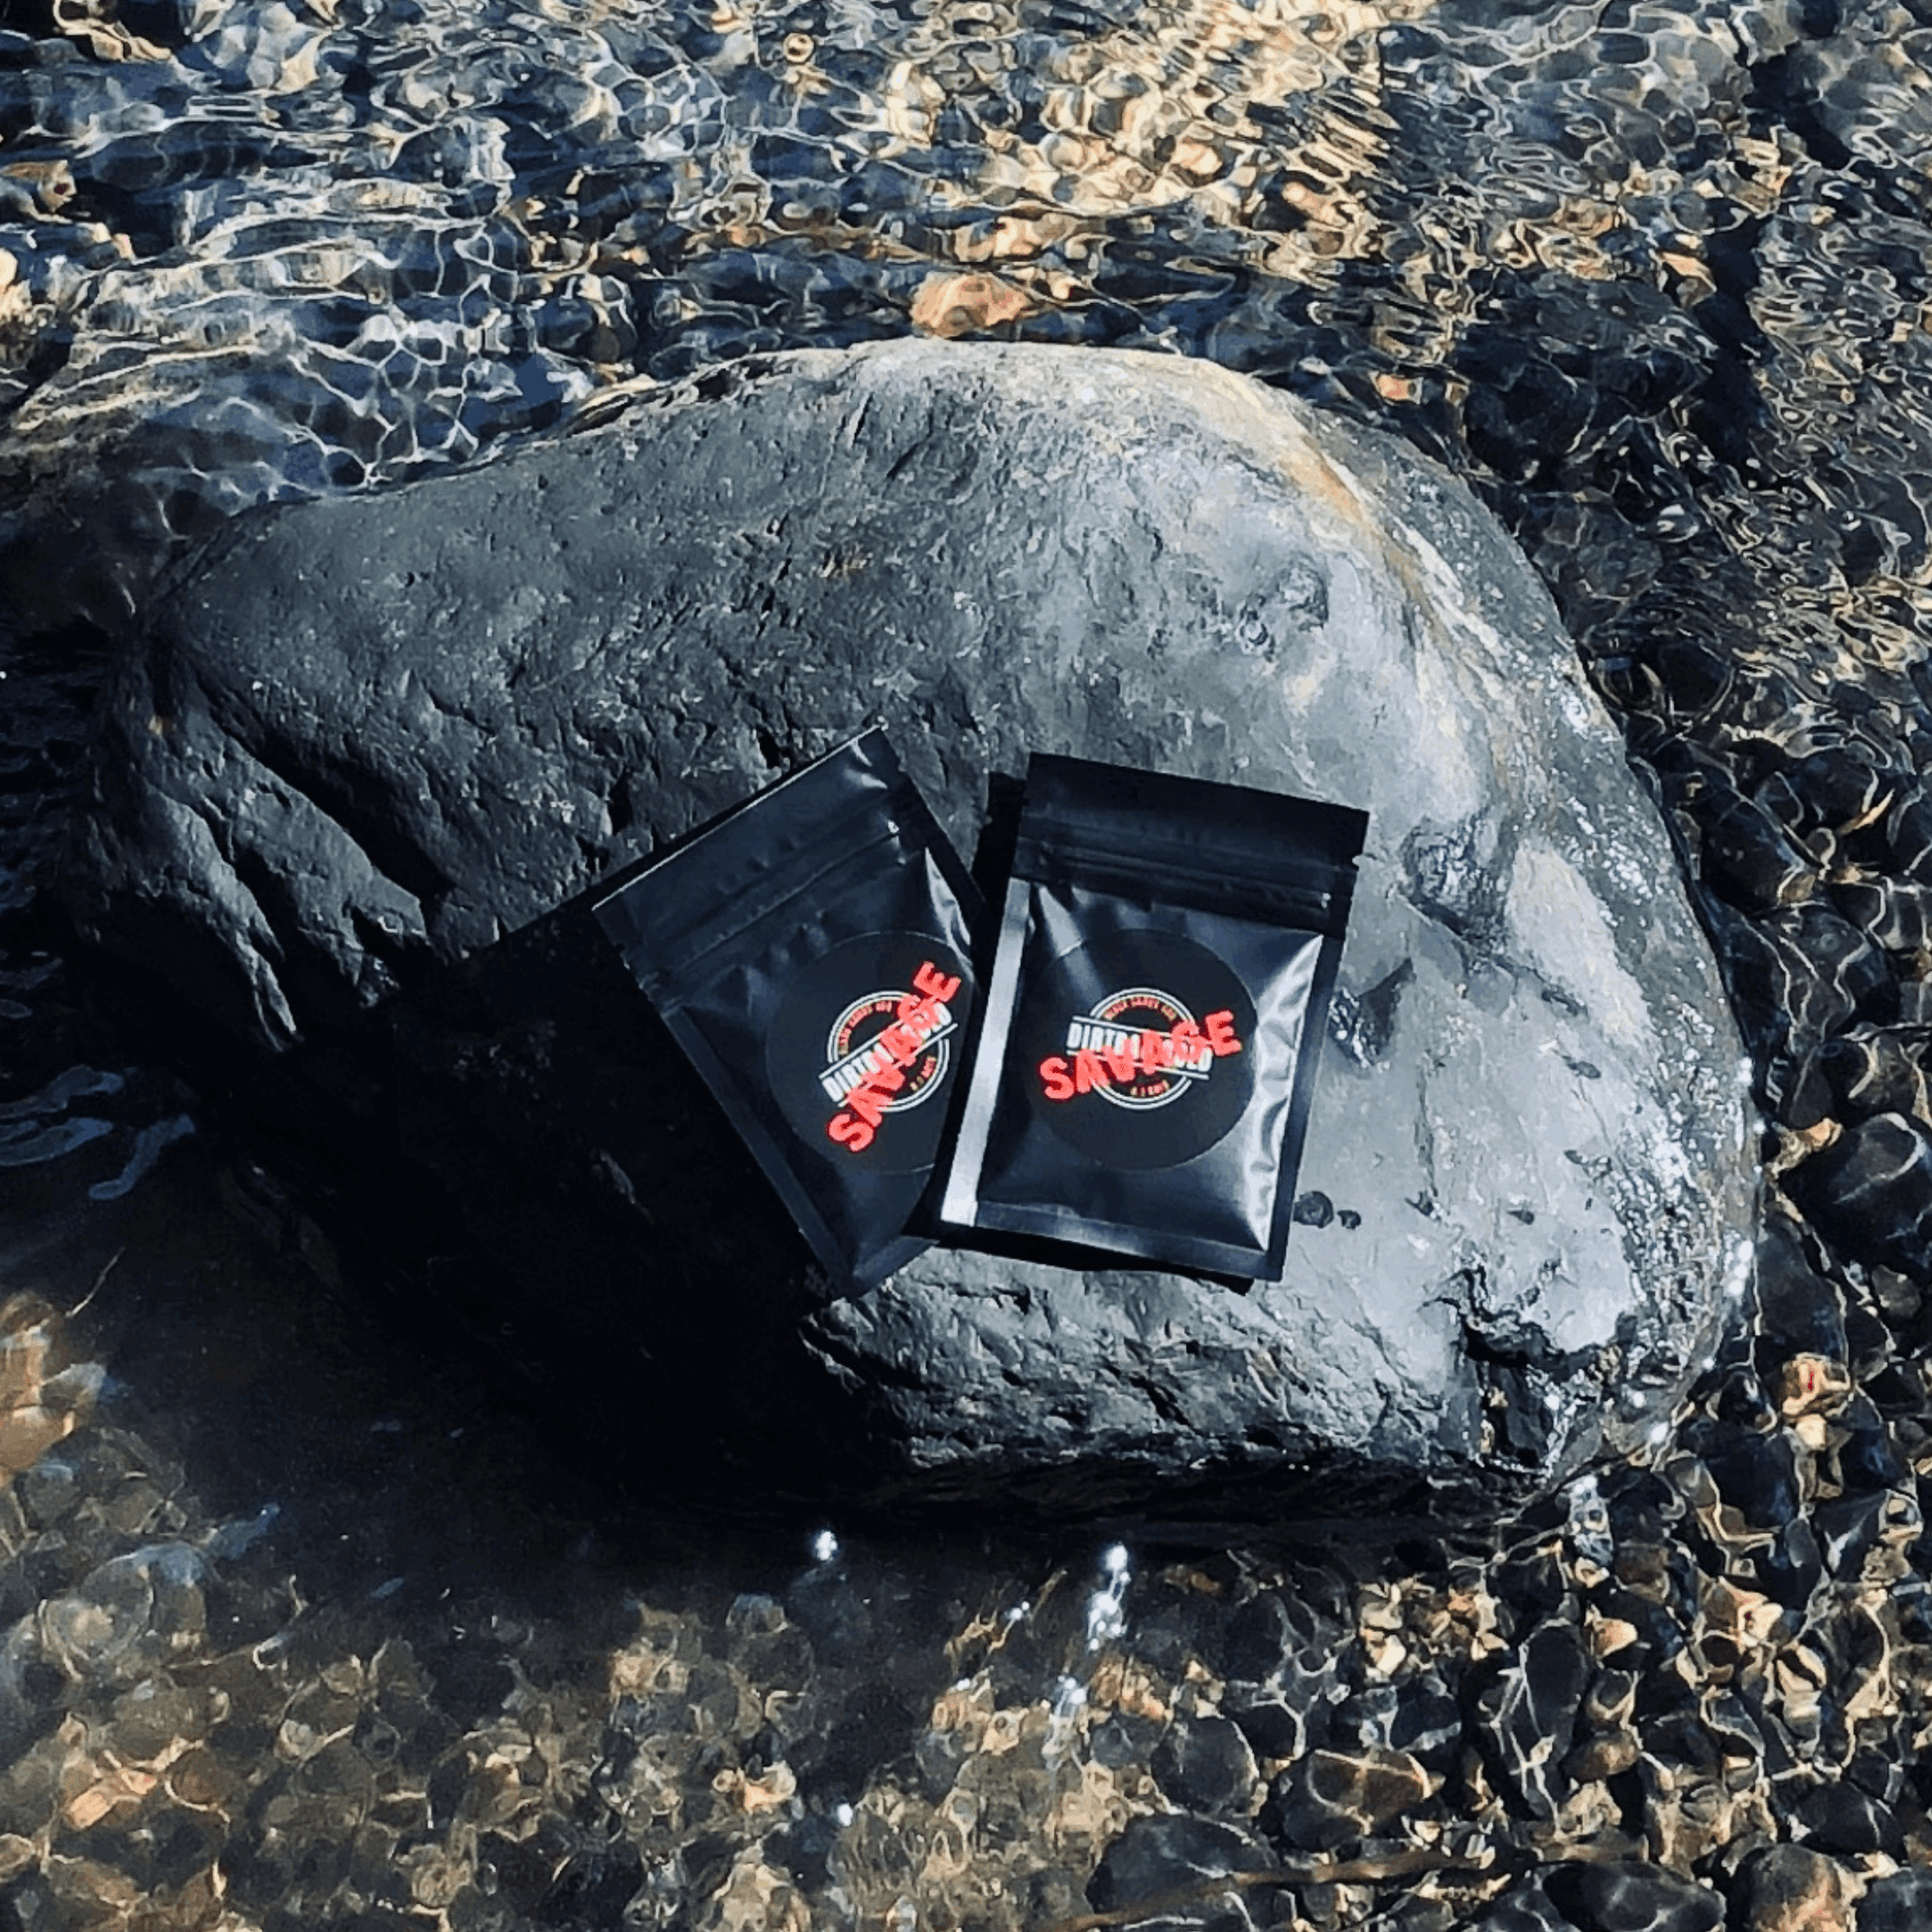 Dive into the excitement of gold panning with Dirtbag Gold's SAVAGE Black Sand Paydirt, offering a challenging mix of black sands and fine gold in every 40g bag.